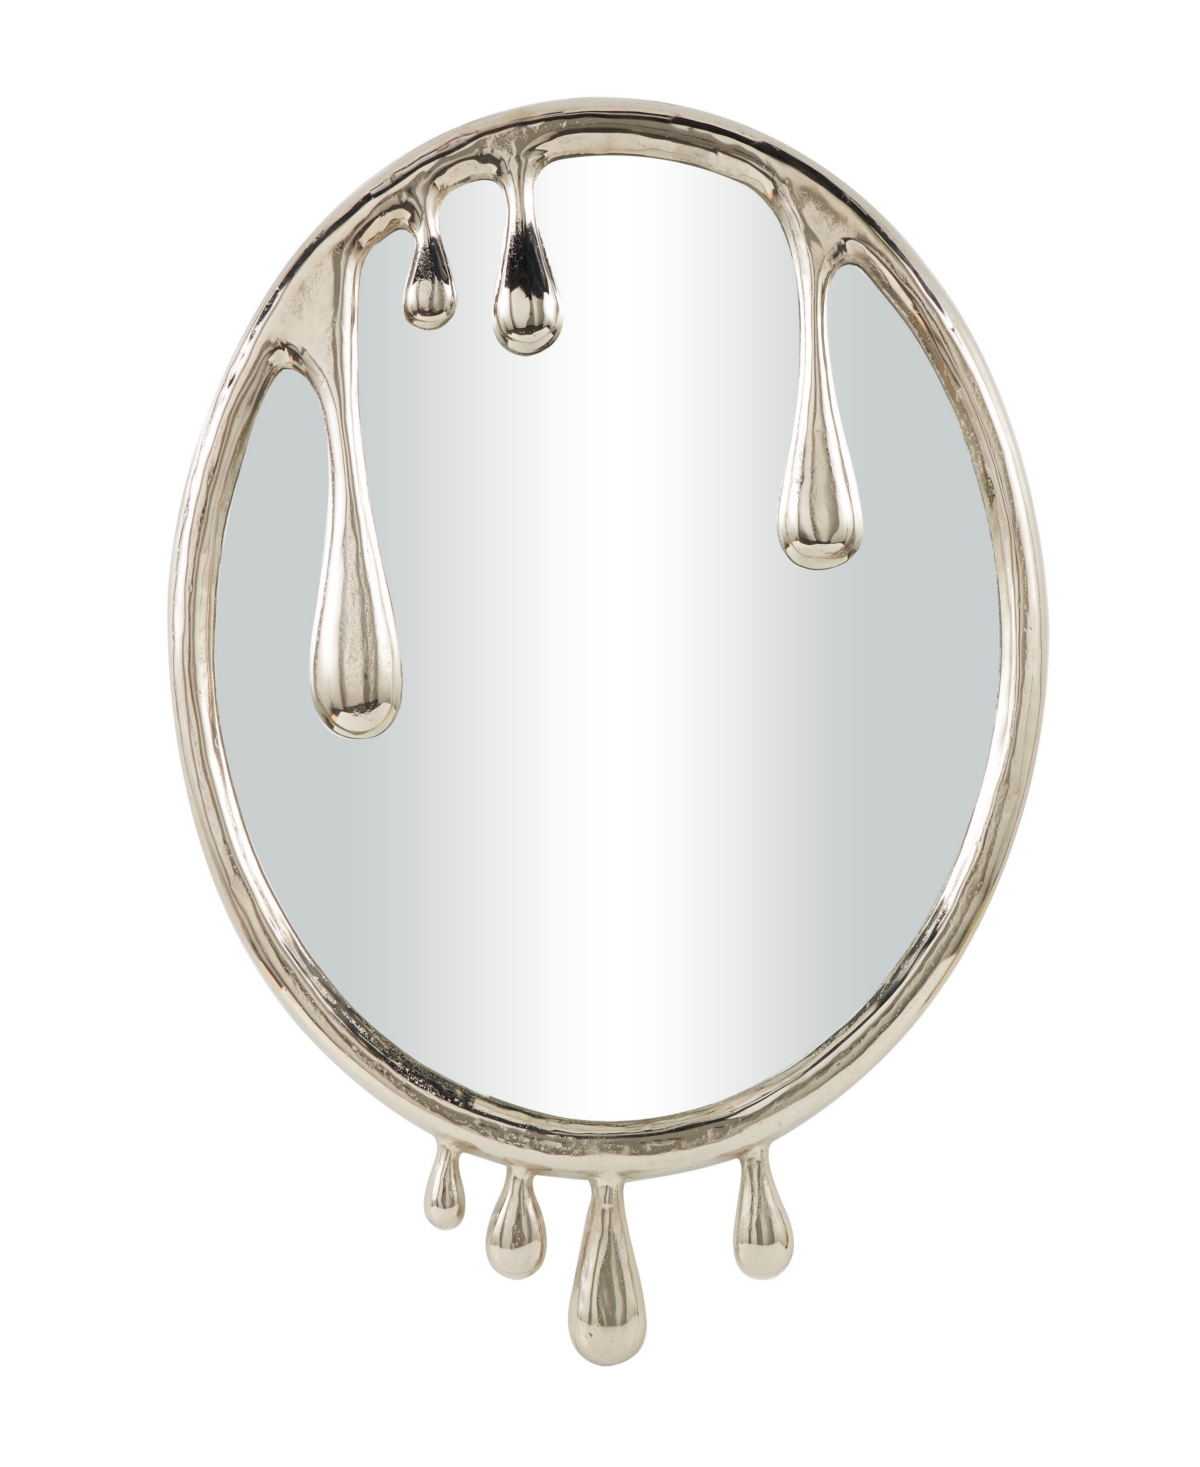 Aluminum Abstract Drip Wall Mirror with Melting Designed Frame, 36" x 1" x 43" - Silver